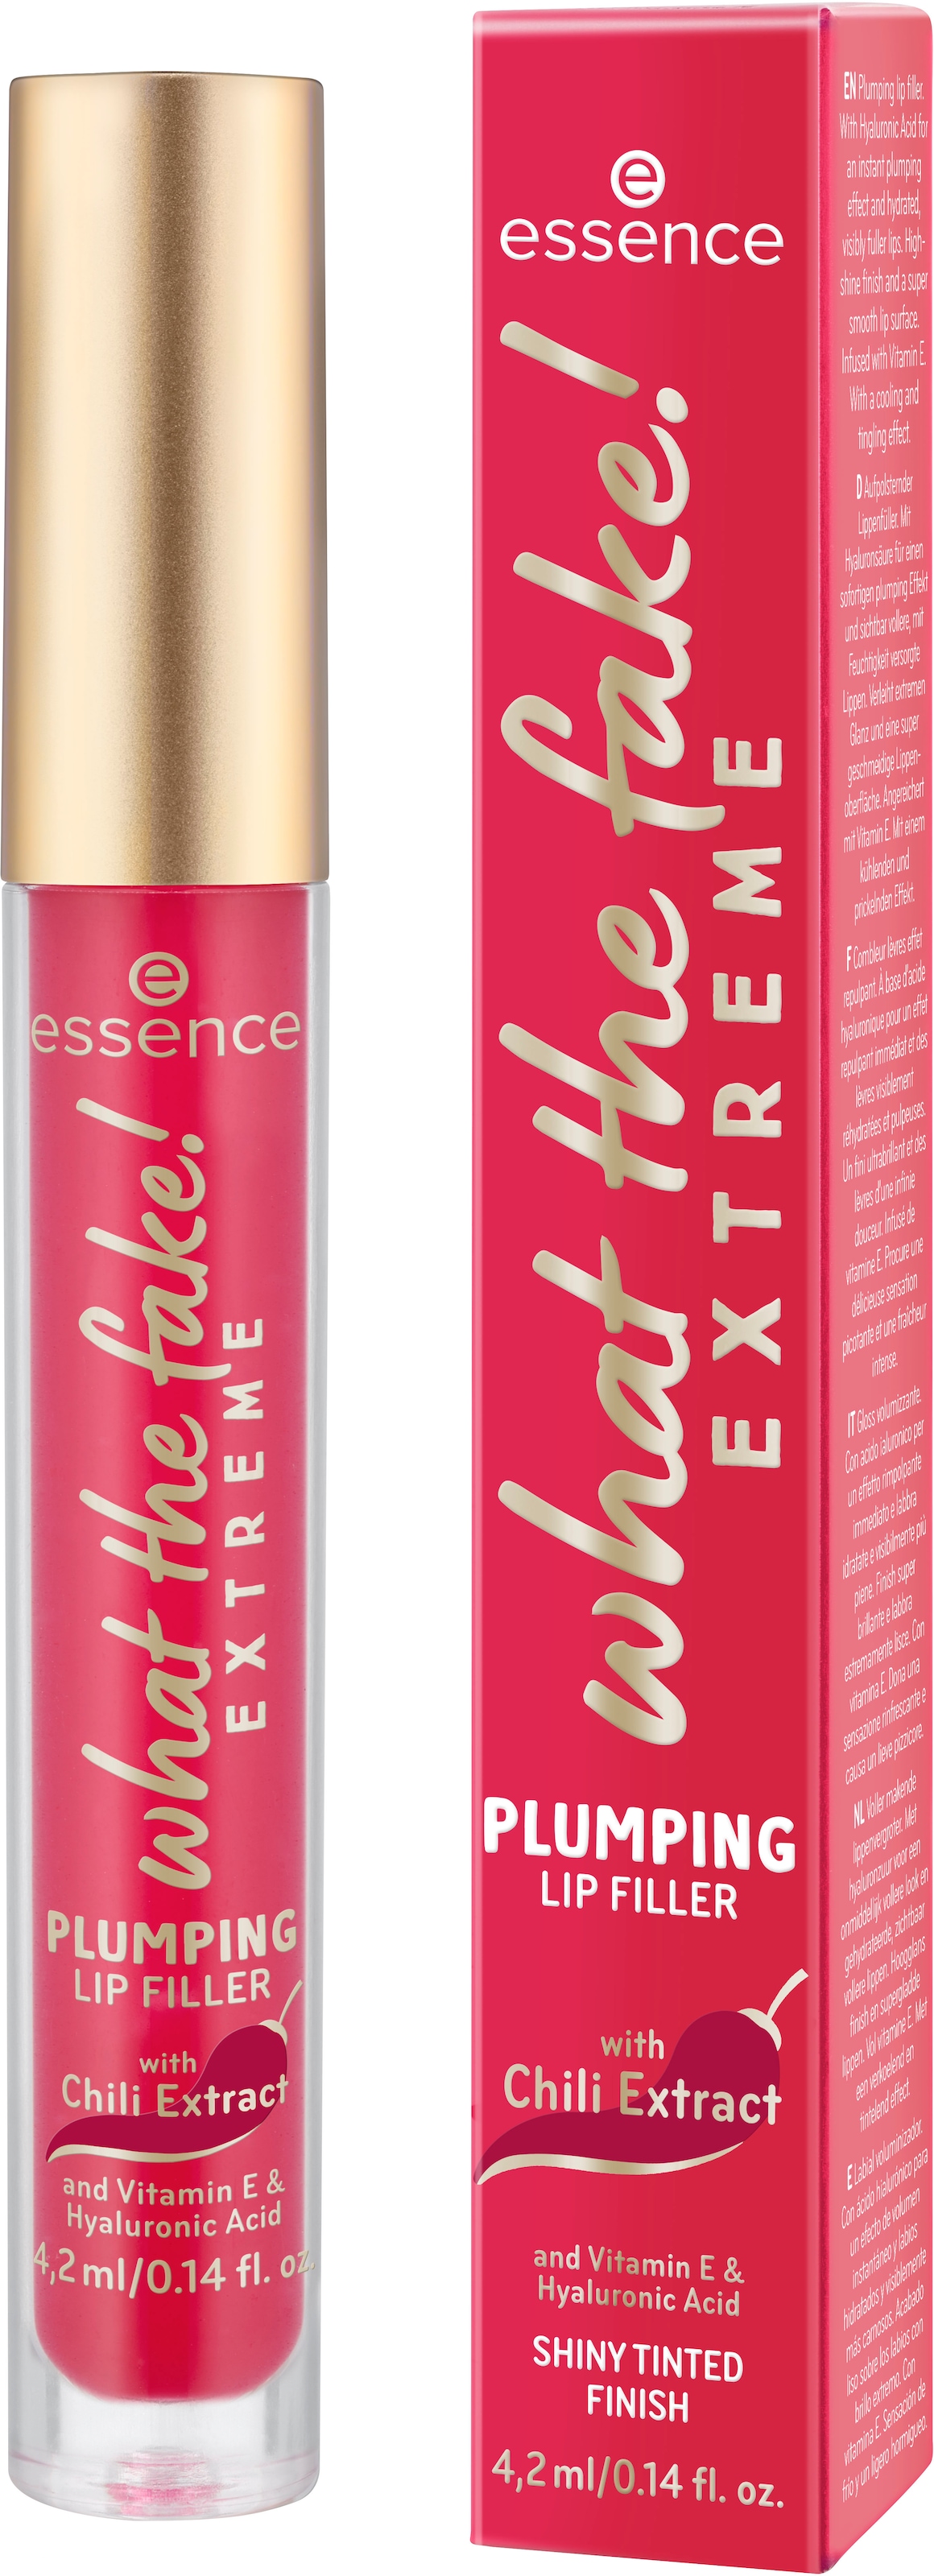 Lip-Booster »what ♕ EXTREME (Set, FILLER«, tlg.) bei 3 Essence fake! PLUMPING LIP the